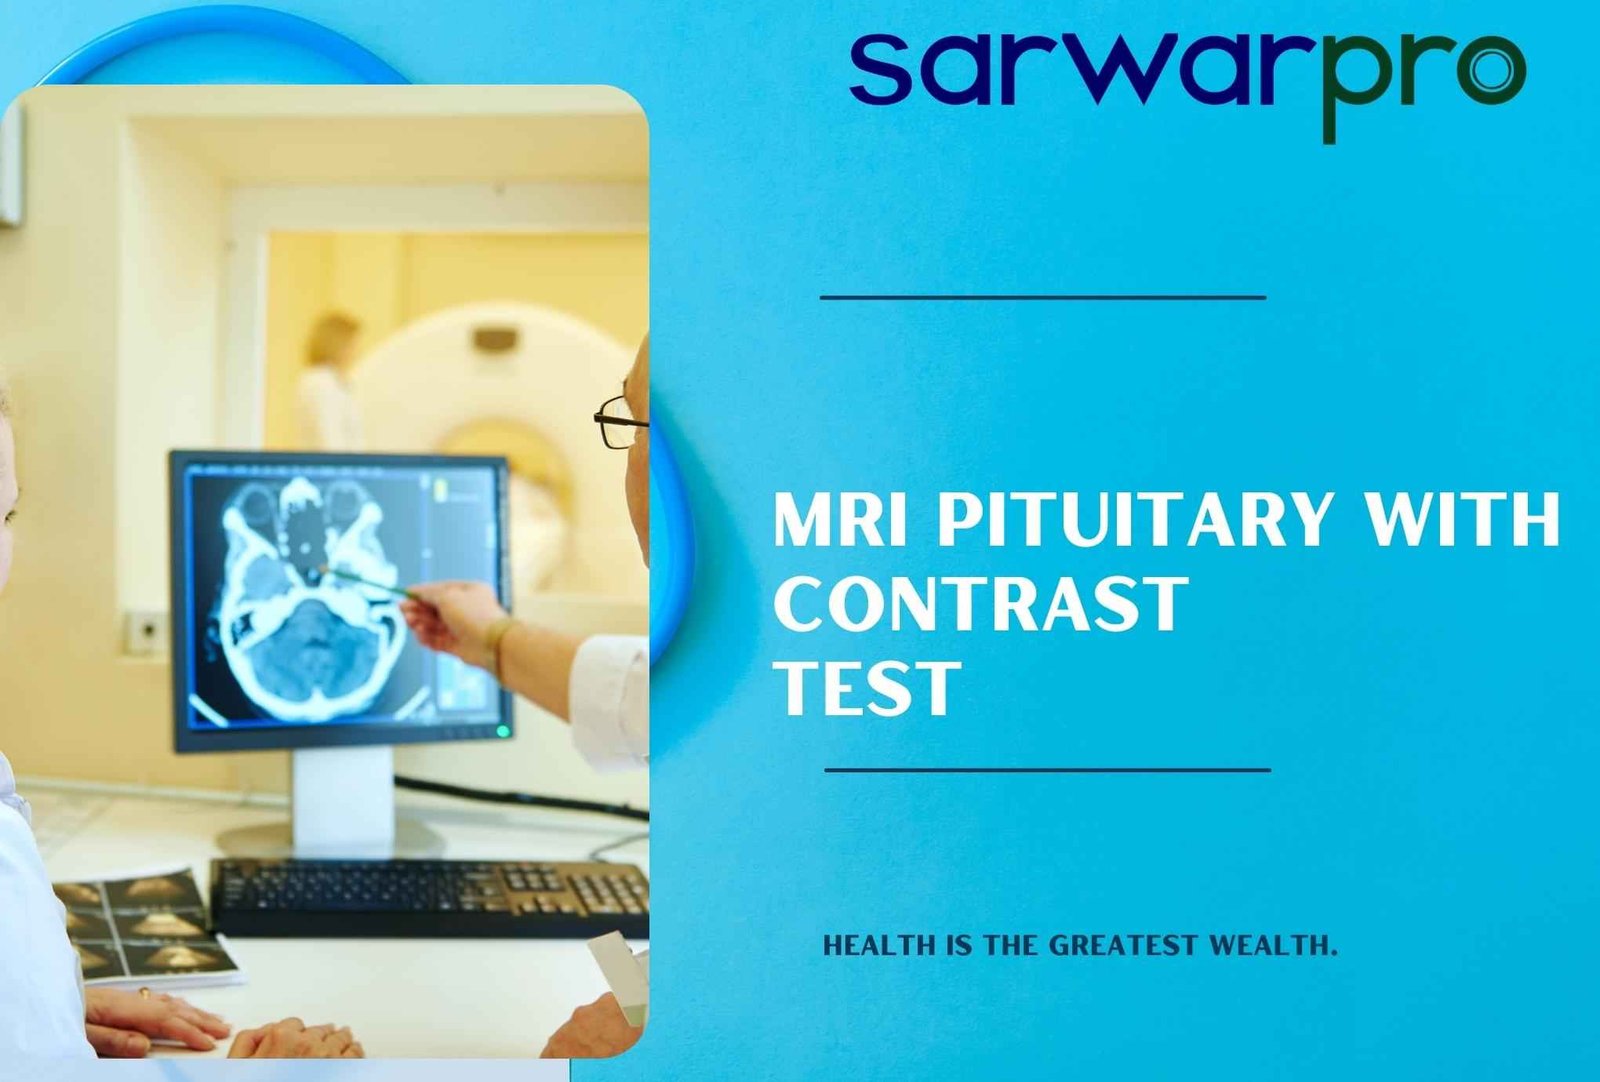 23332mri-pituitary-with-contrast-test.jpg